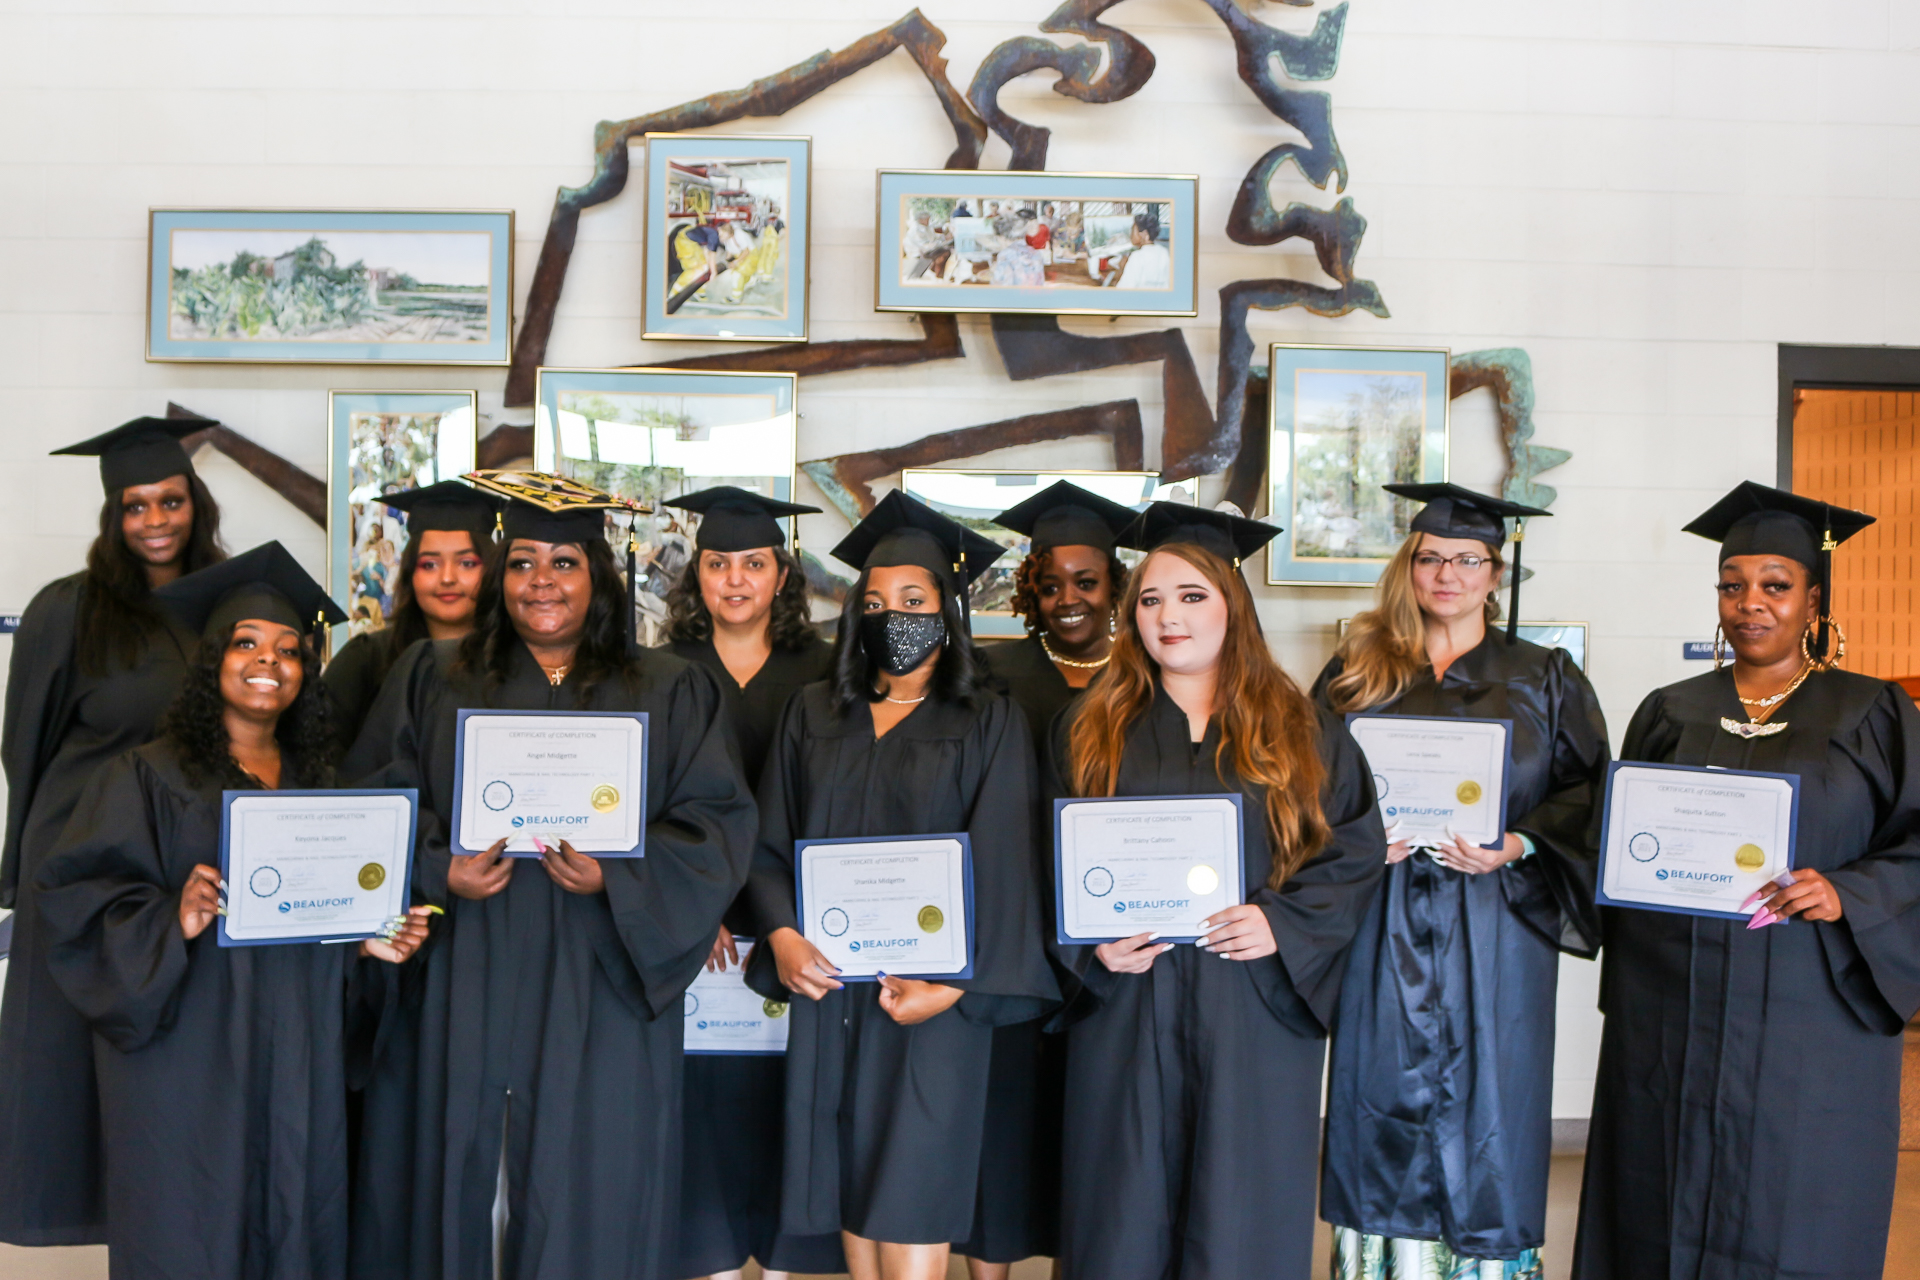 Students with certificates in caps and gowns